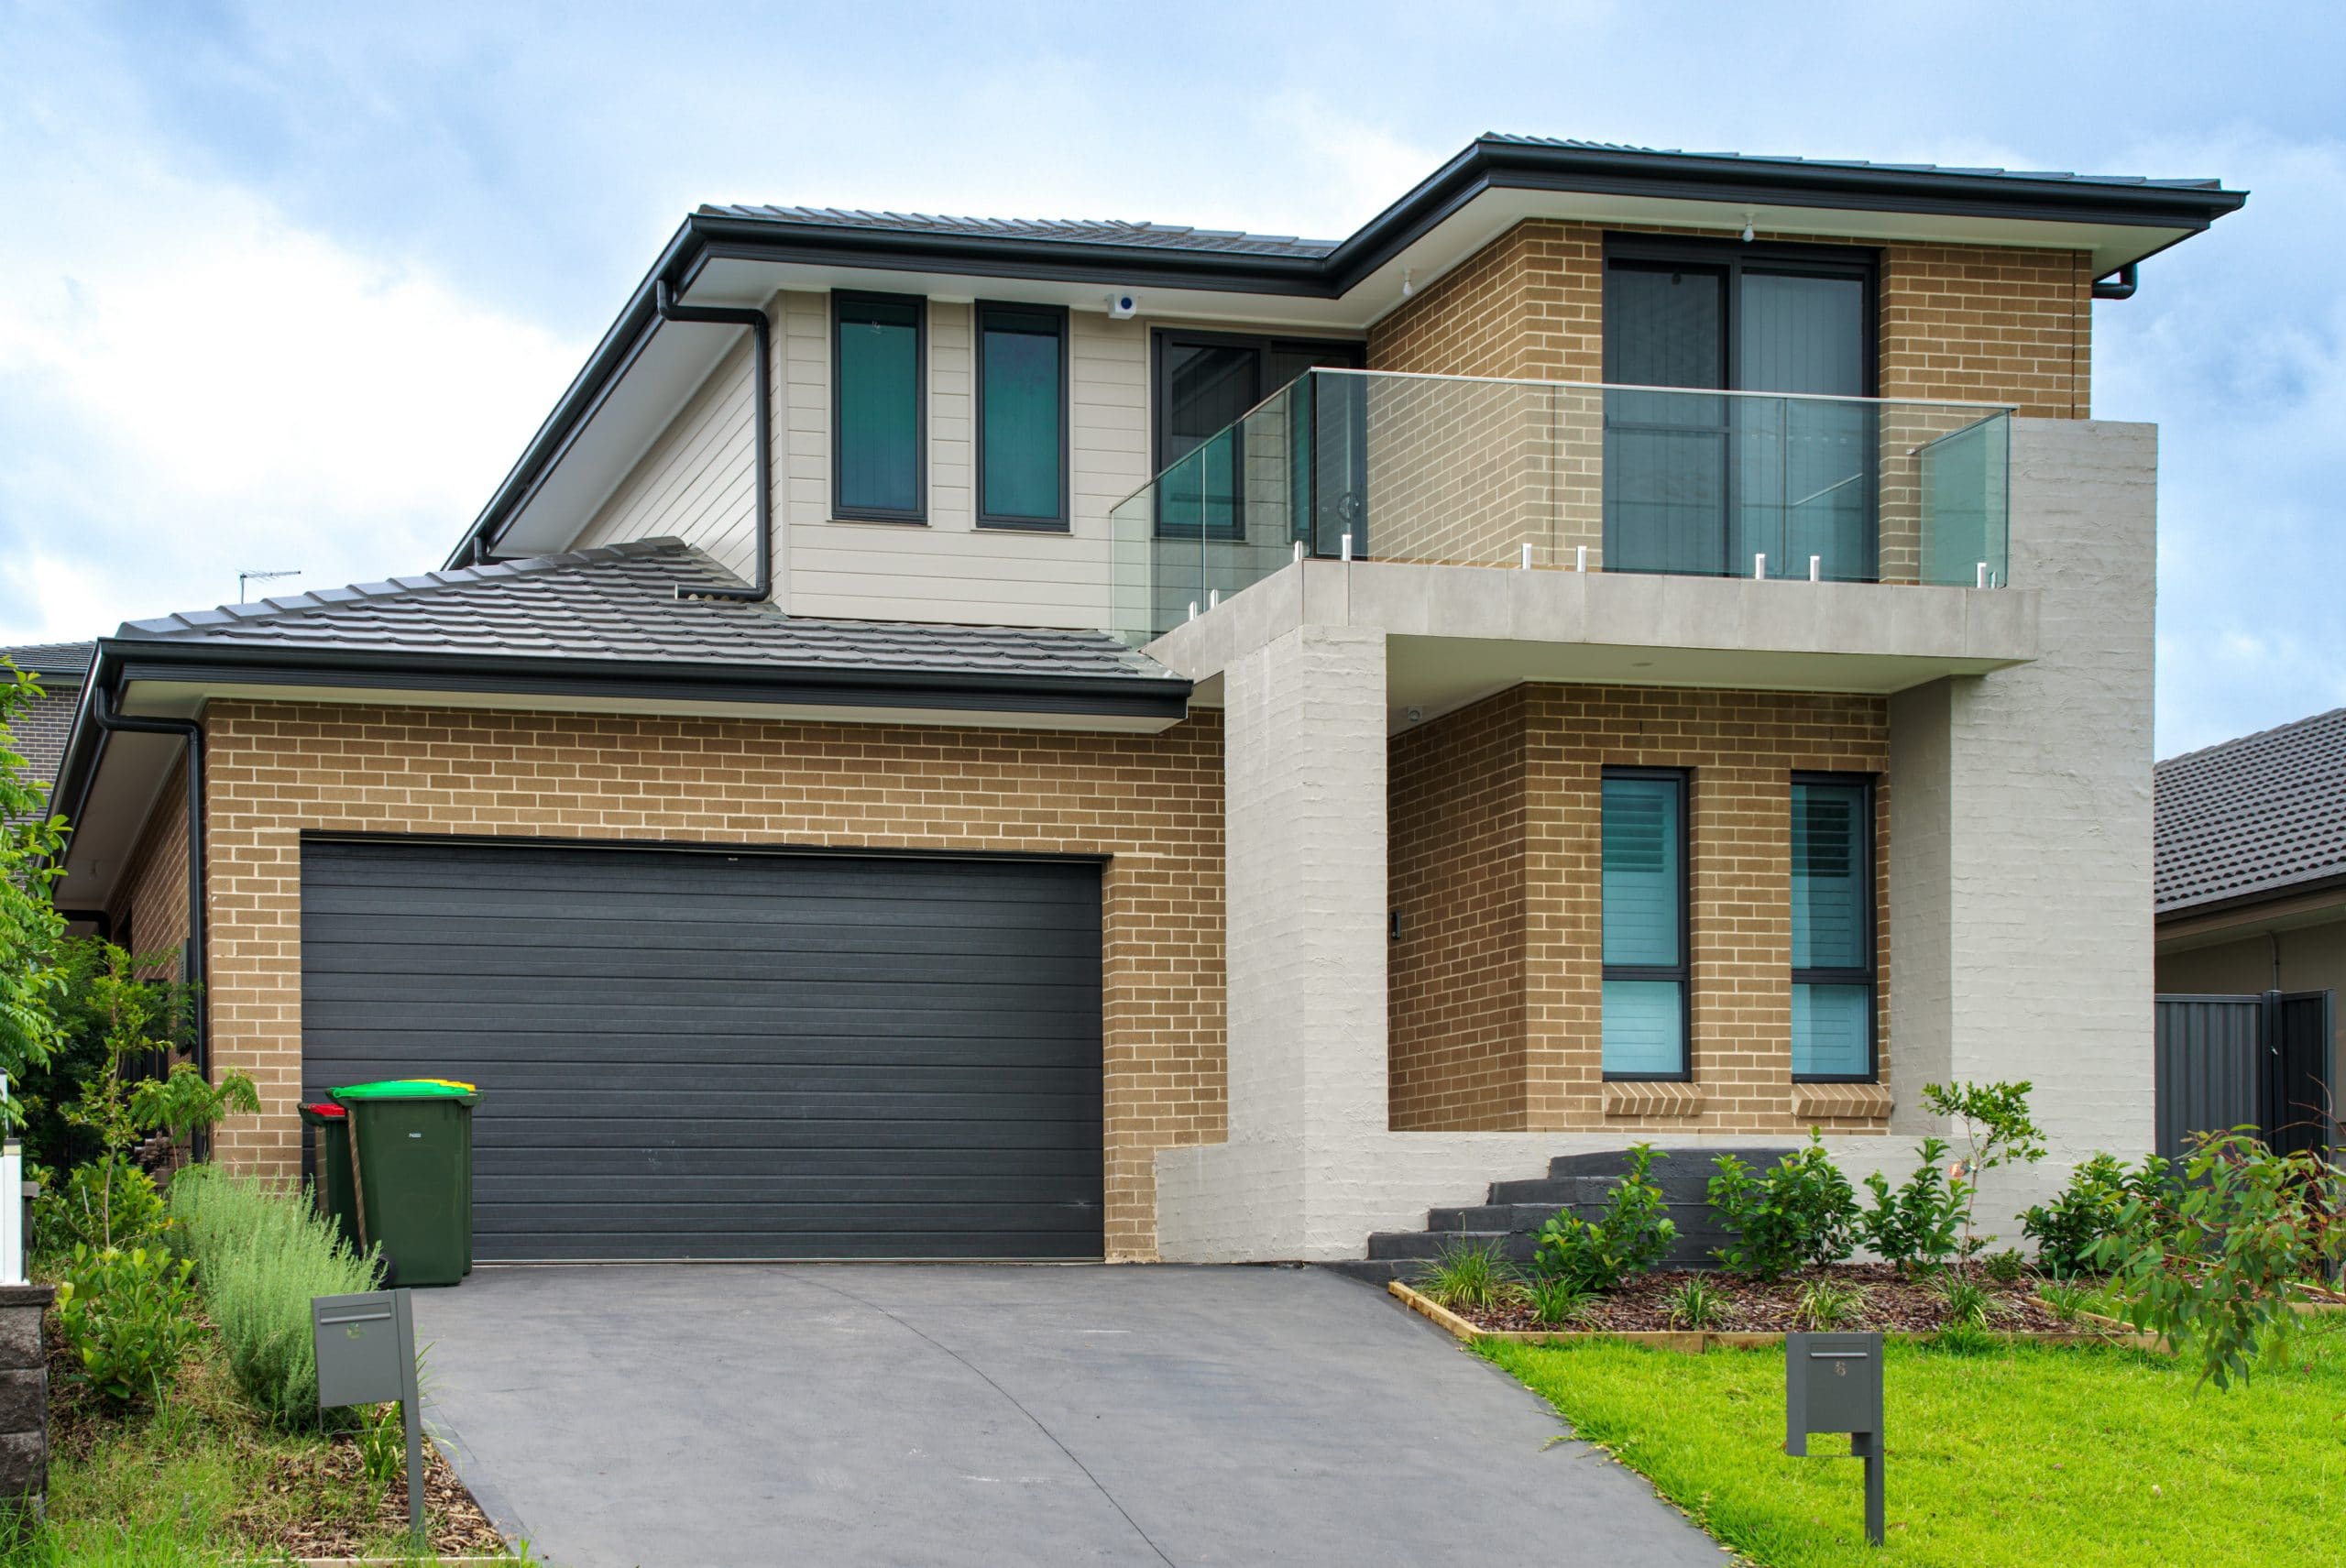 Two storey home located in Campbelltown